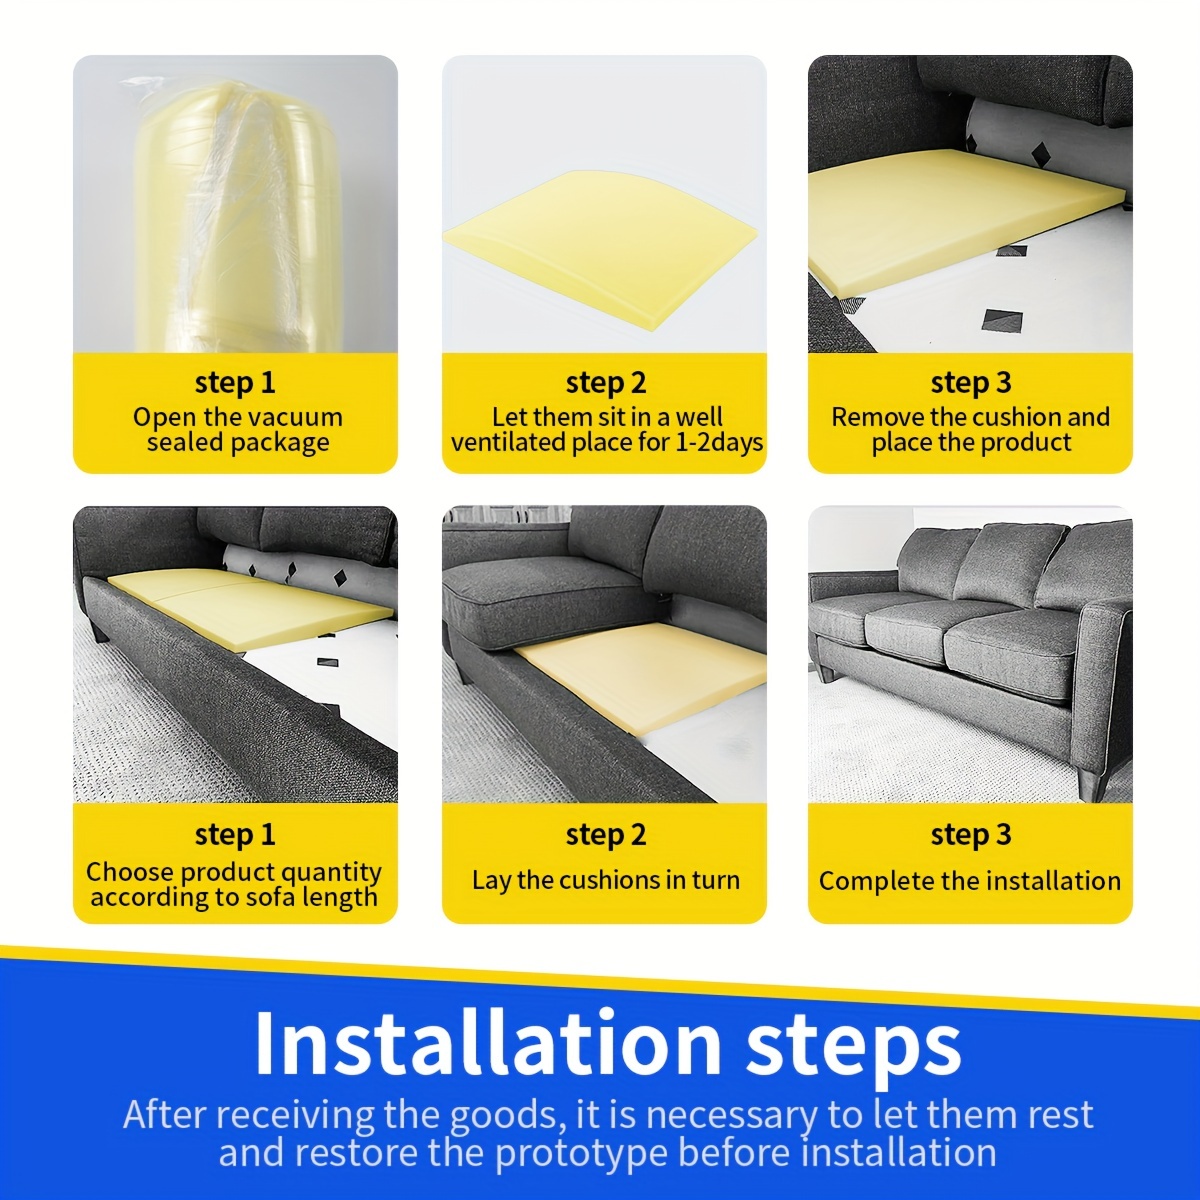 Five reasons to invest in sofa cushion replacement - Foam Superstore